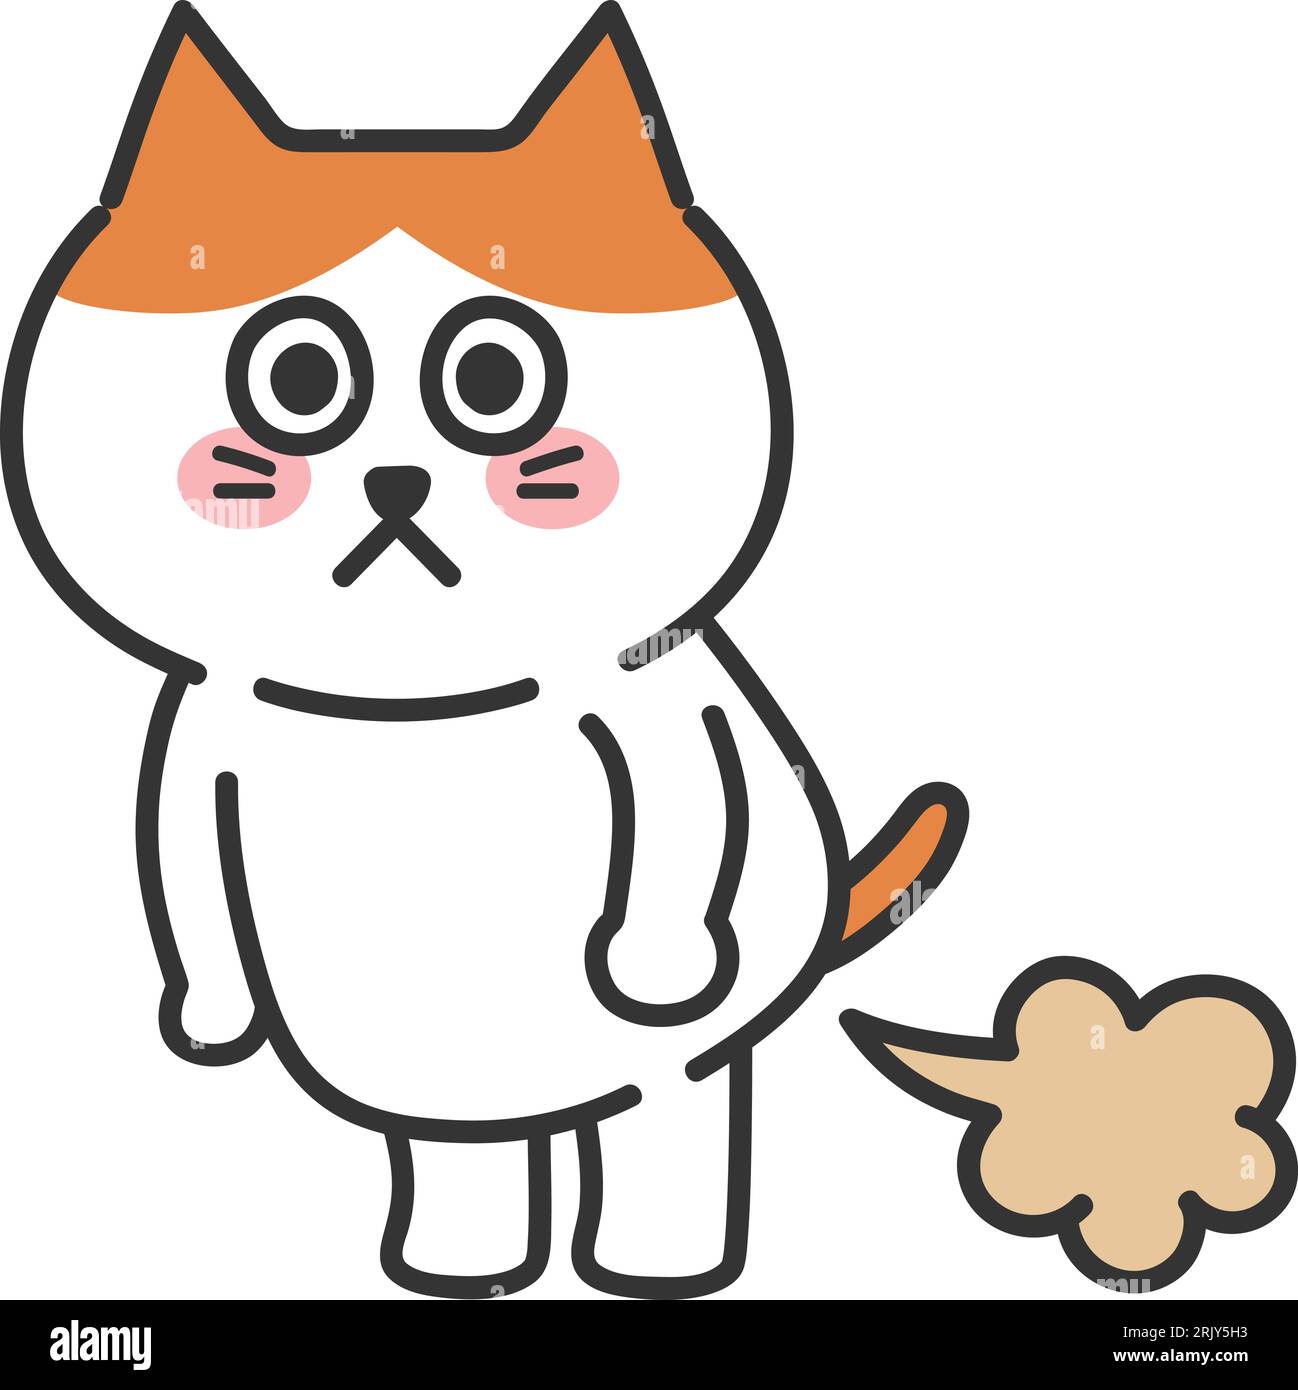 Orange tabby cartoon cat pooted loudly, vector illustration. Stock Vector